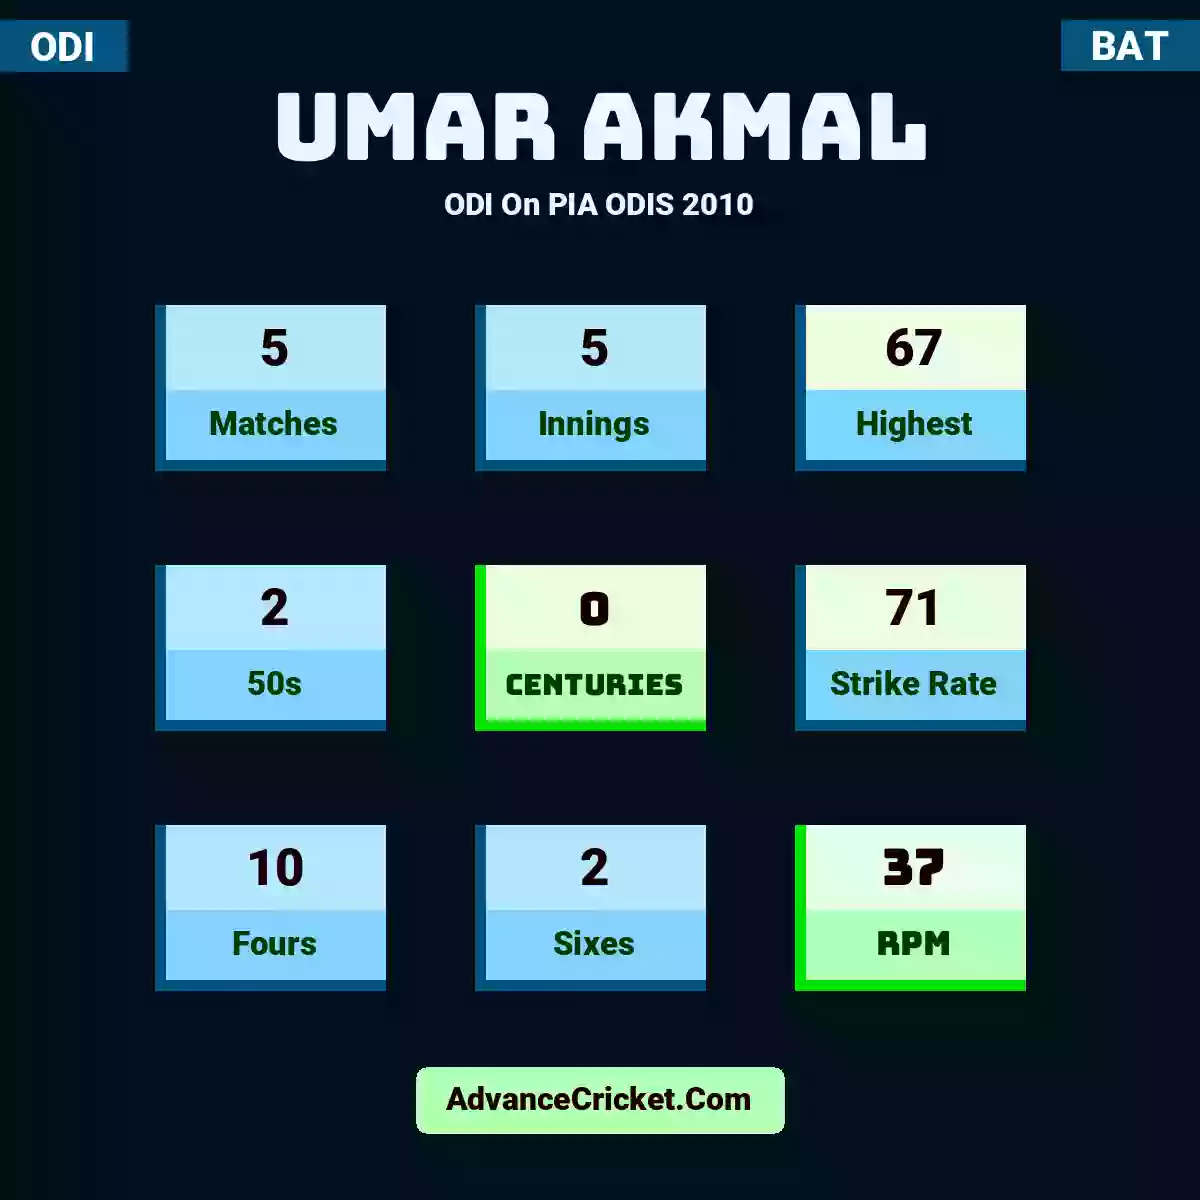 Umar Akmal ODI  On PIA ODIS 2010, Umar Akmal played 5 matches, scored 67 runs as highest, 2 half-centuries, and 0 centuries, with a strike rate of 71. U.Akmal hit 10 fours and 2 sixes, with an RPM of 37.